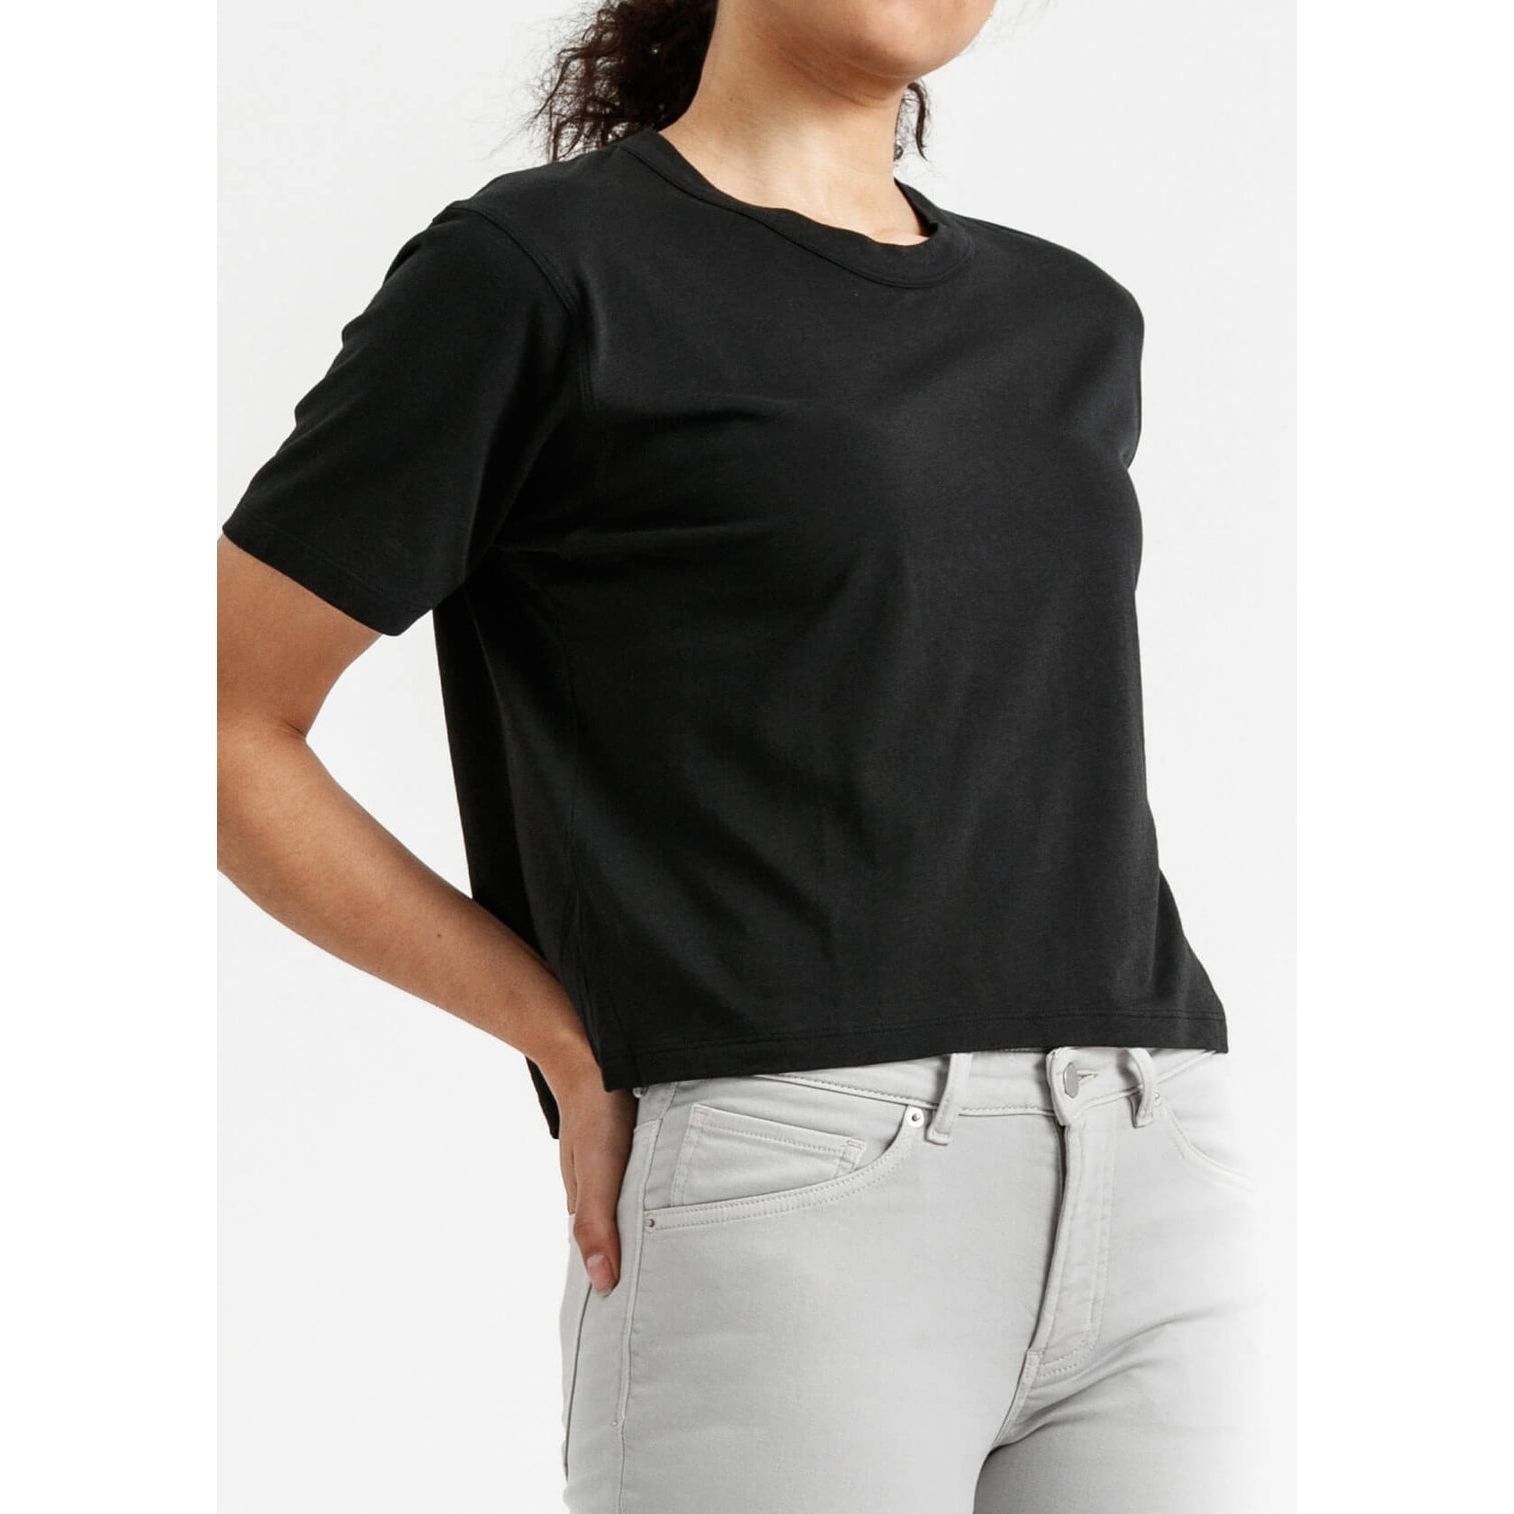 The Only Tee Crop pour Femmes||The Only Tee Crop Women's